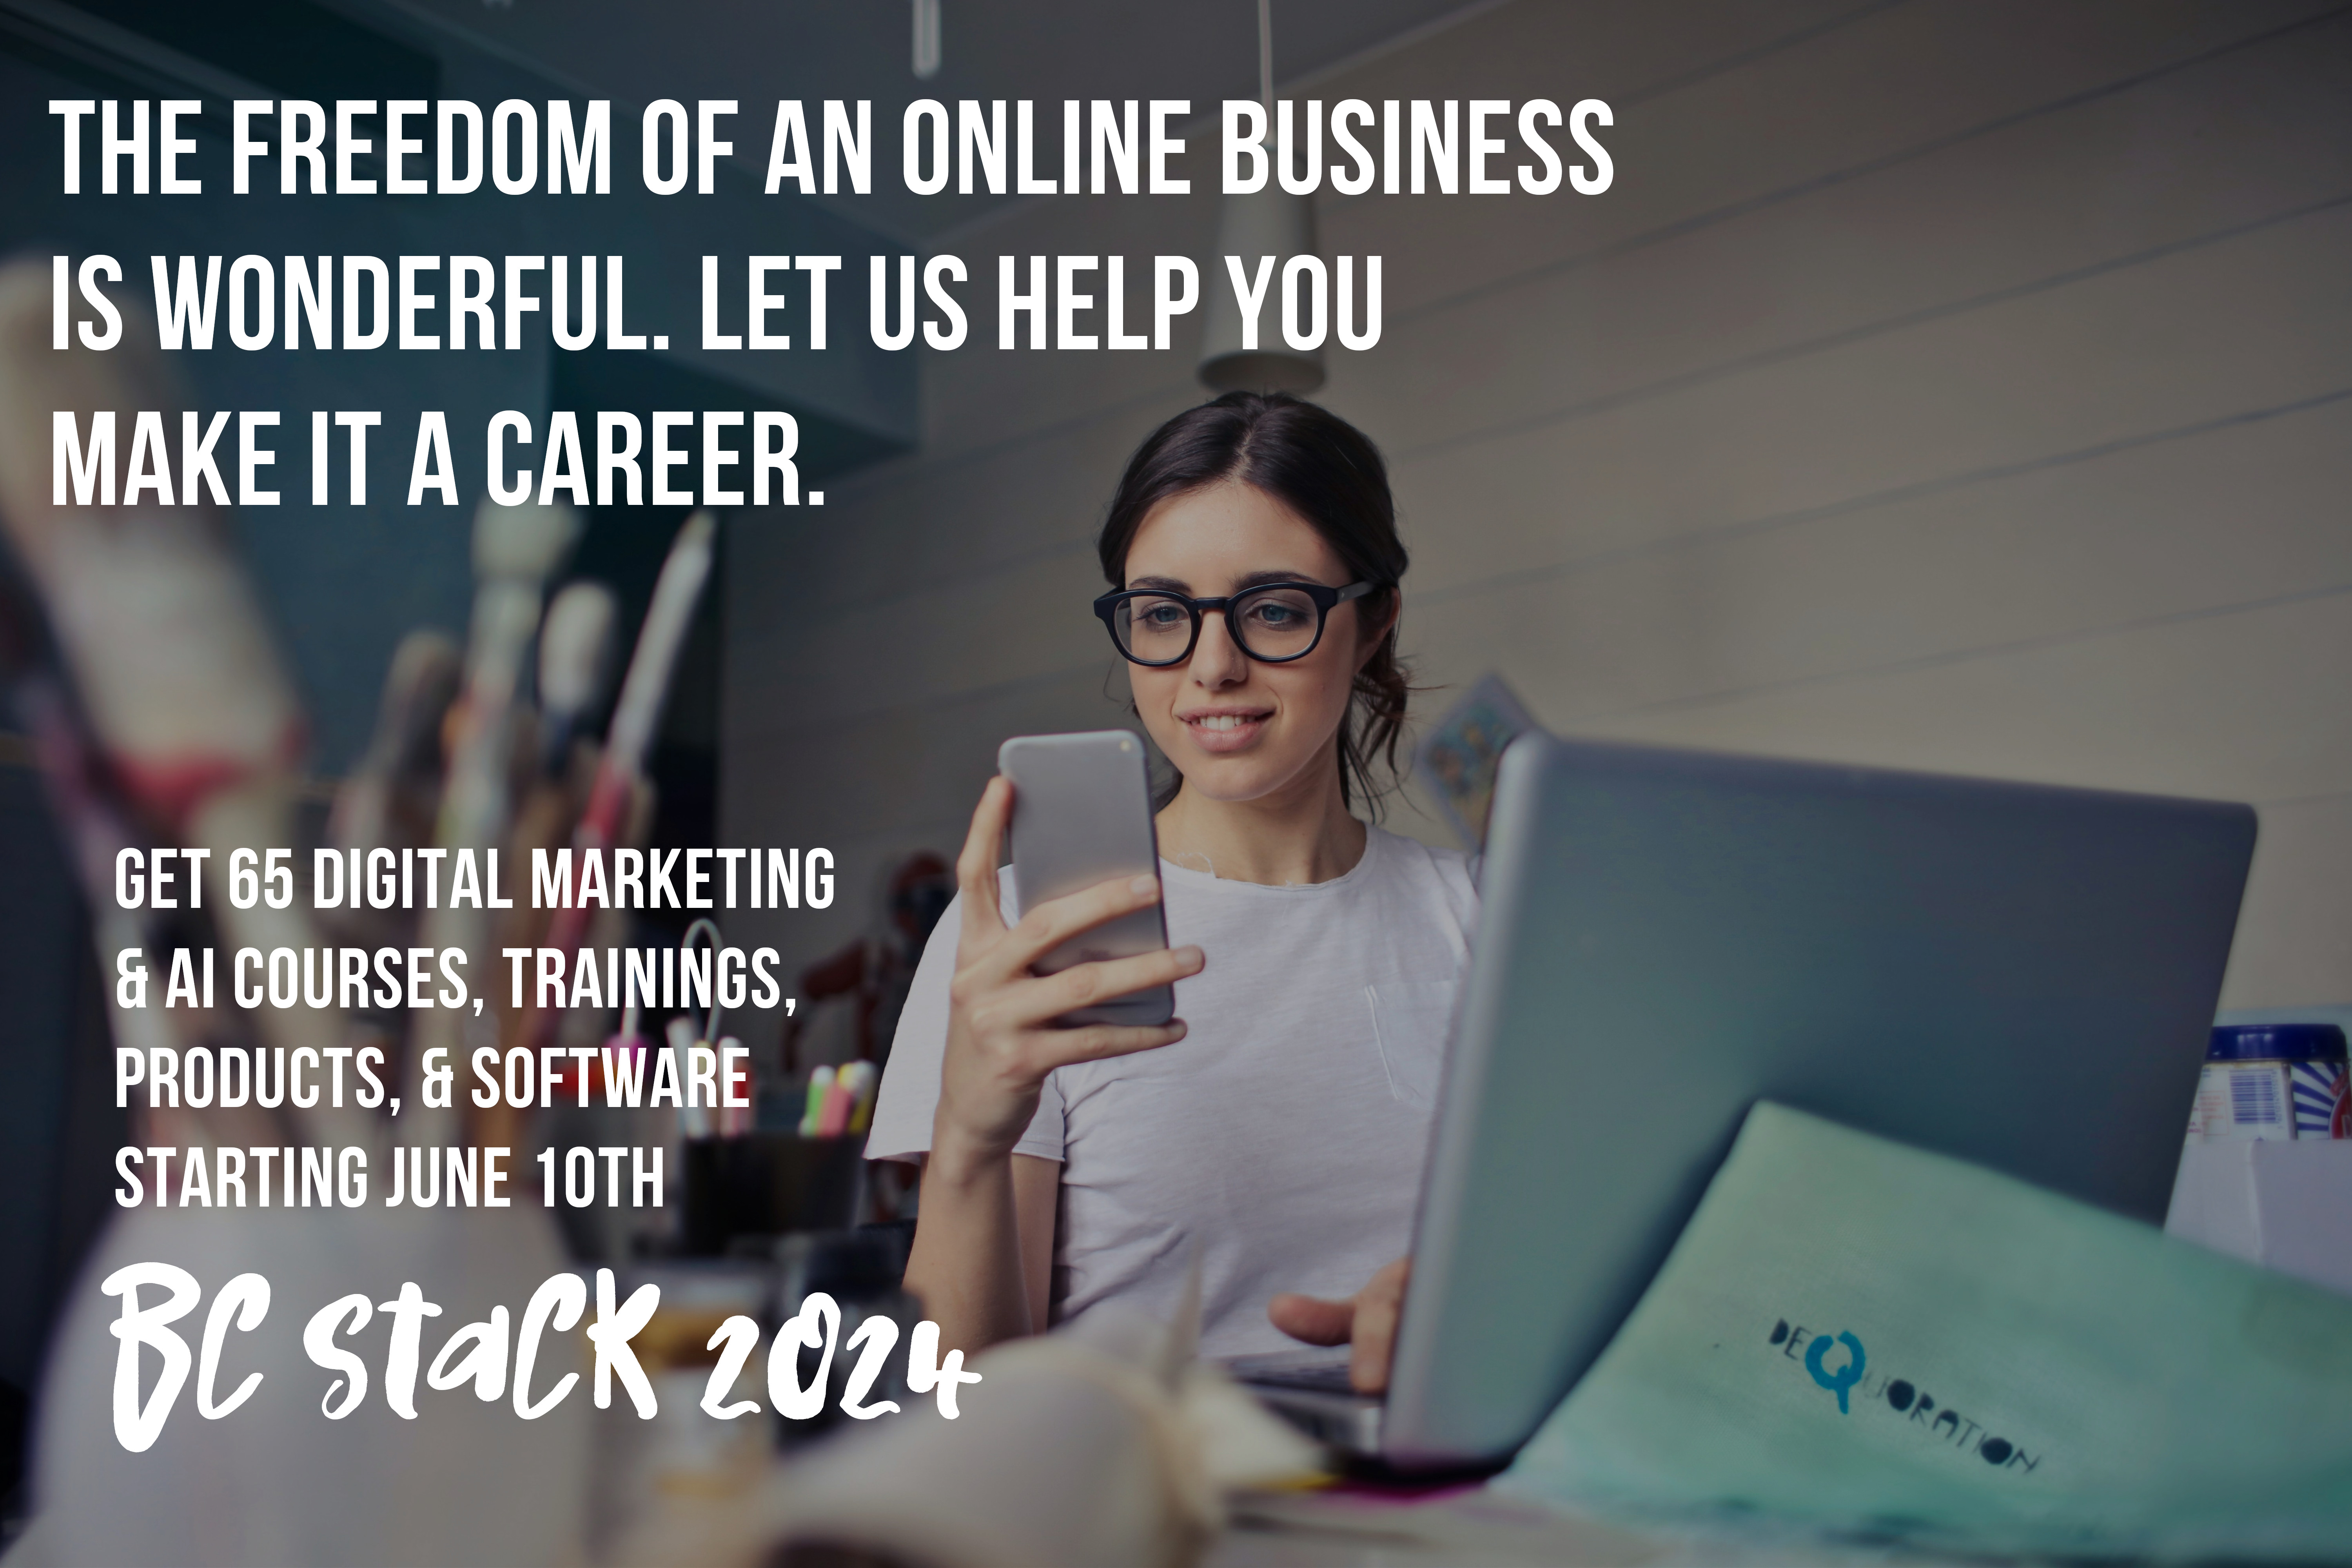 Freedom with online business witht BC Stack